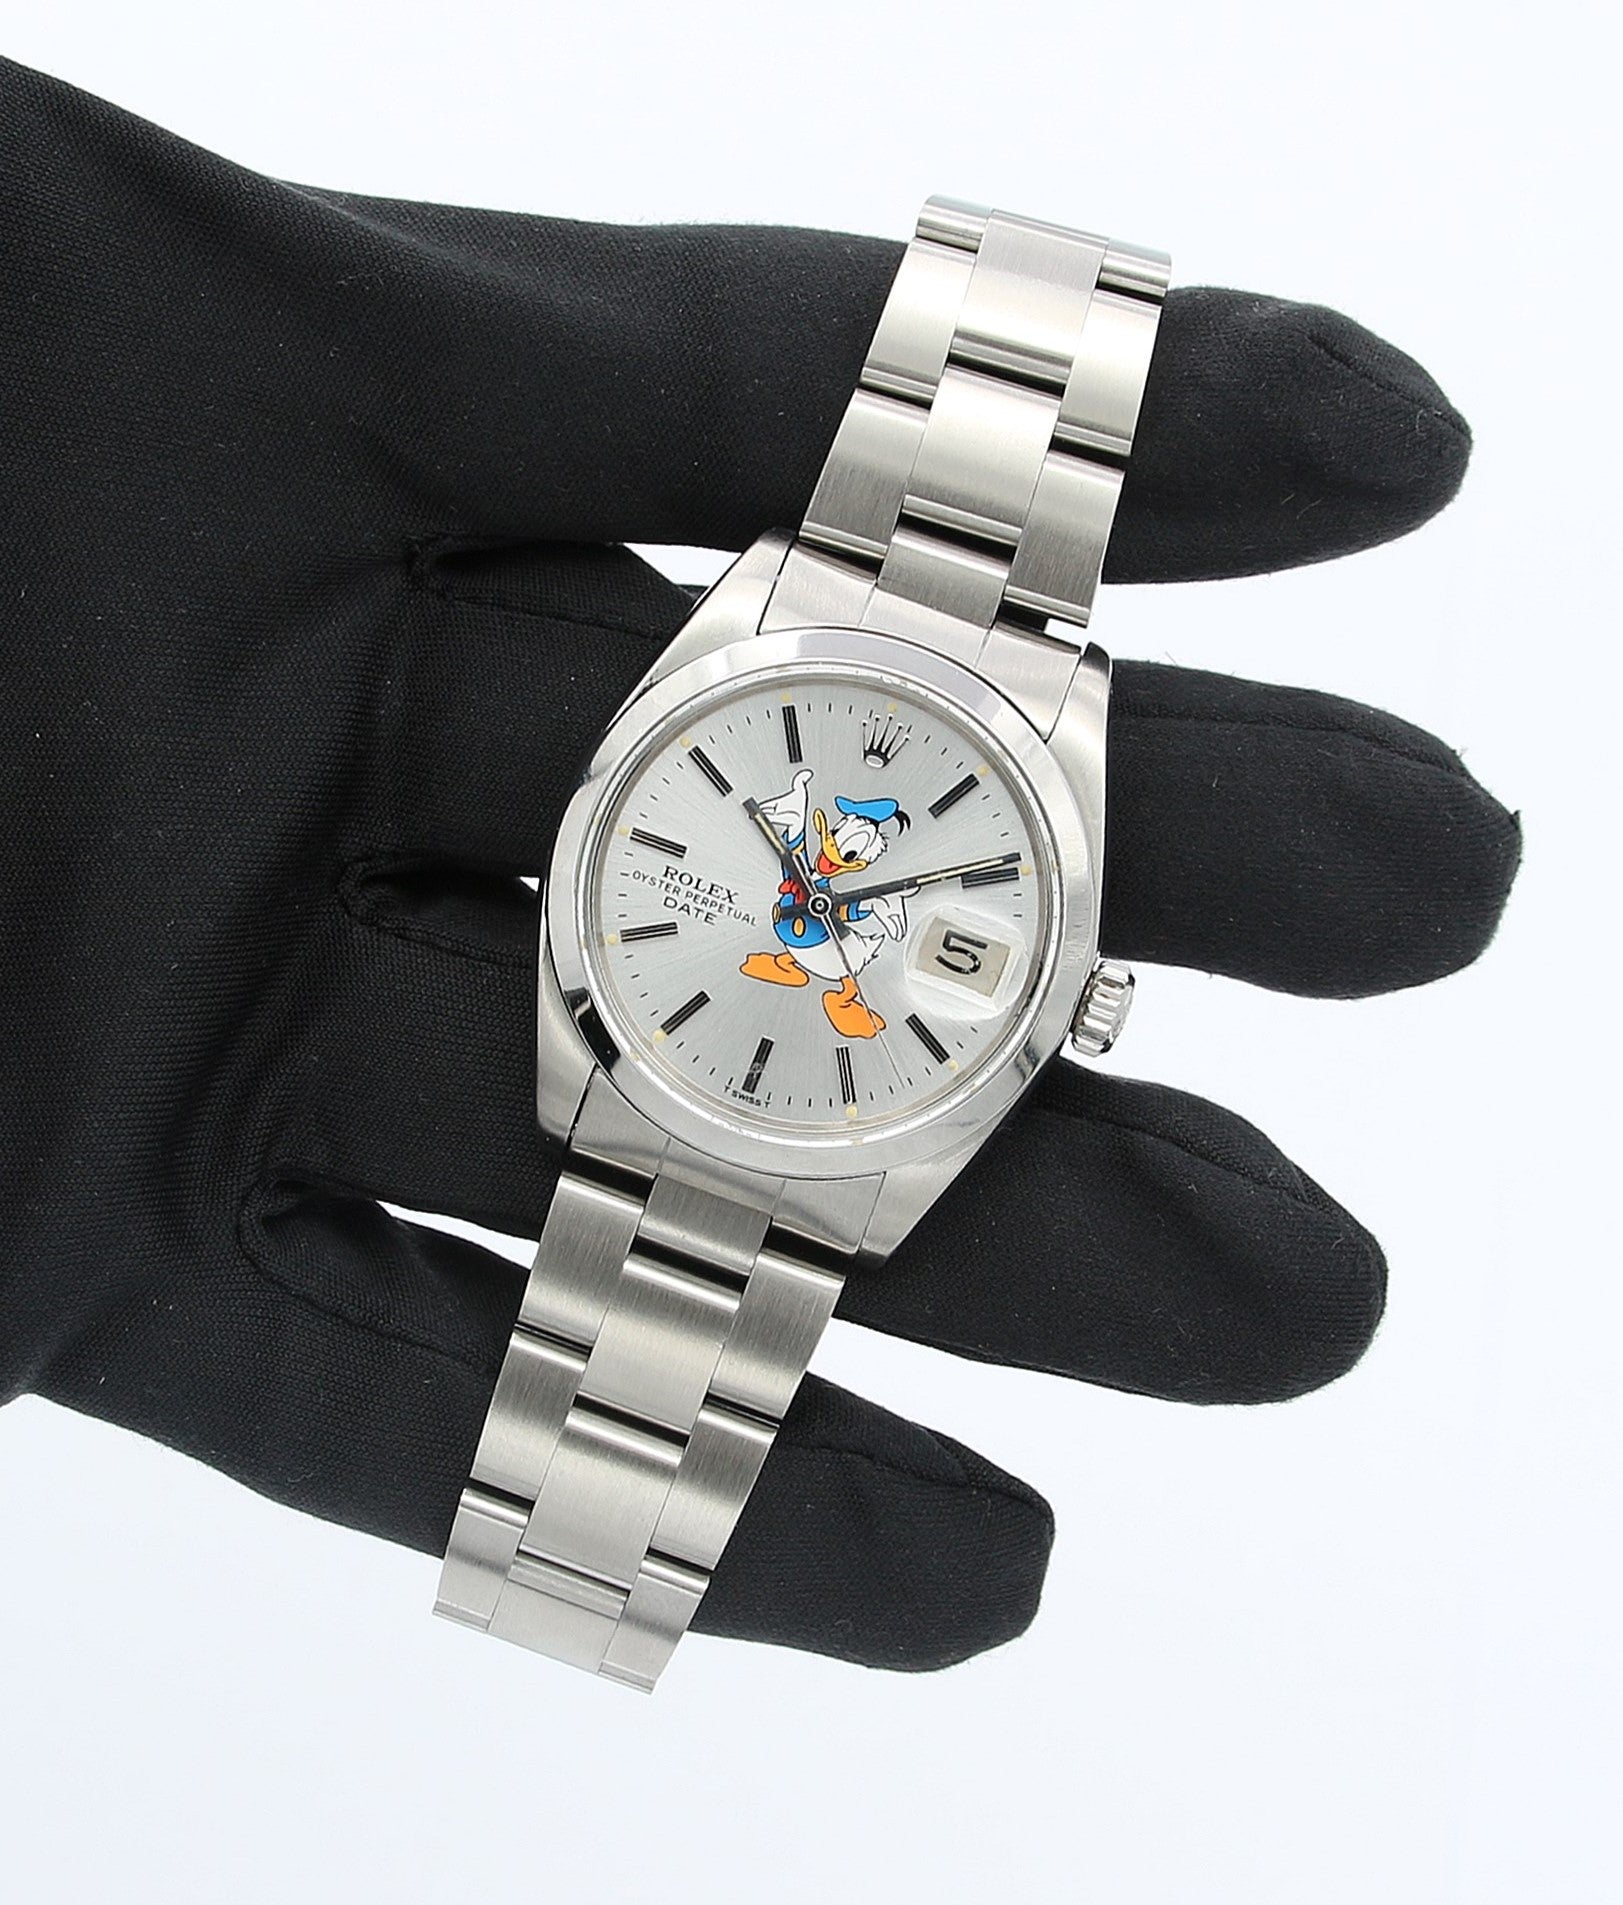 Rolex Oyster Perpetual Date ref. 1500 34mm - Donald Duck Dial - Oyster bracelet